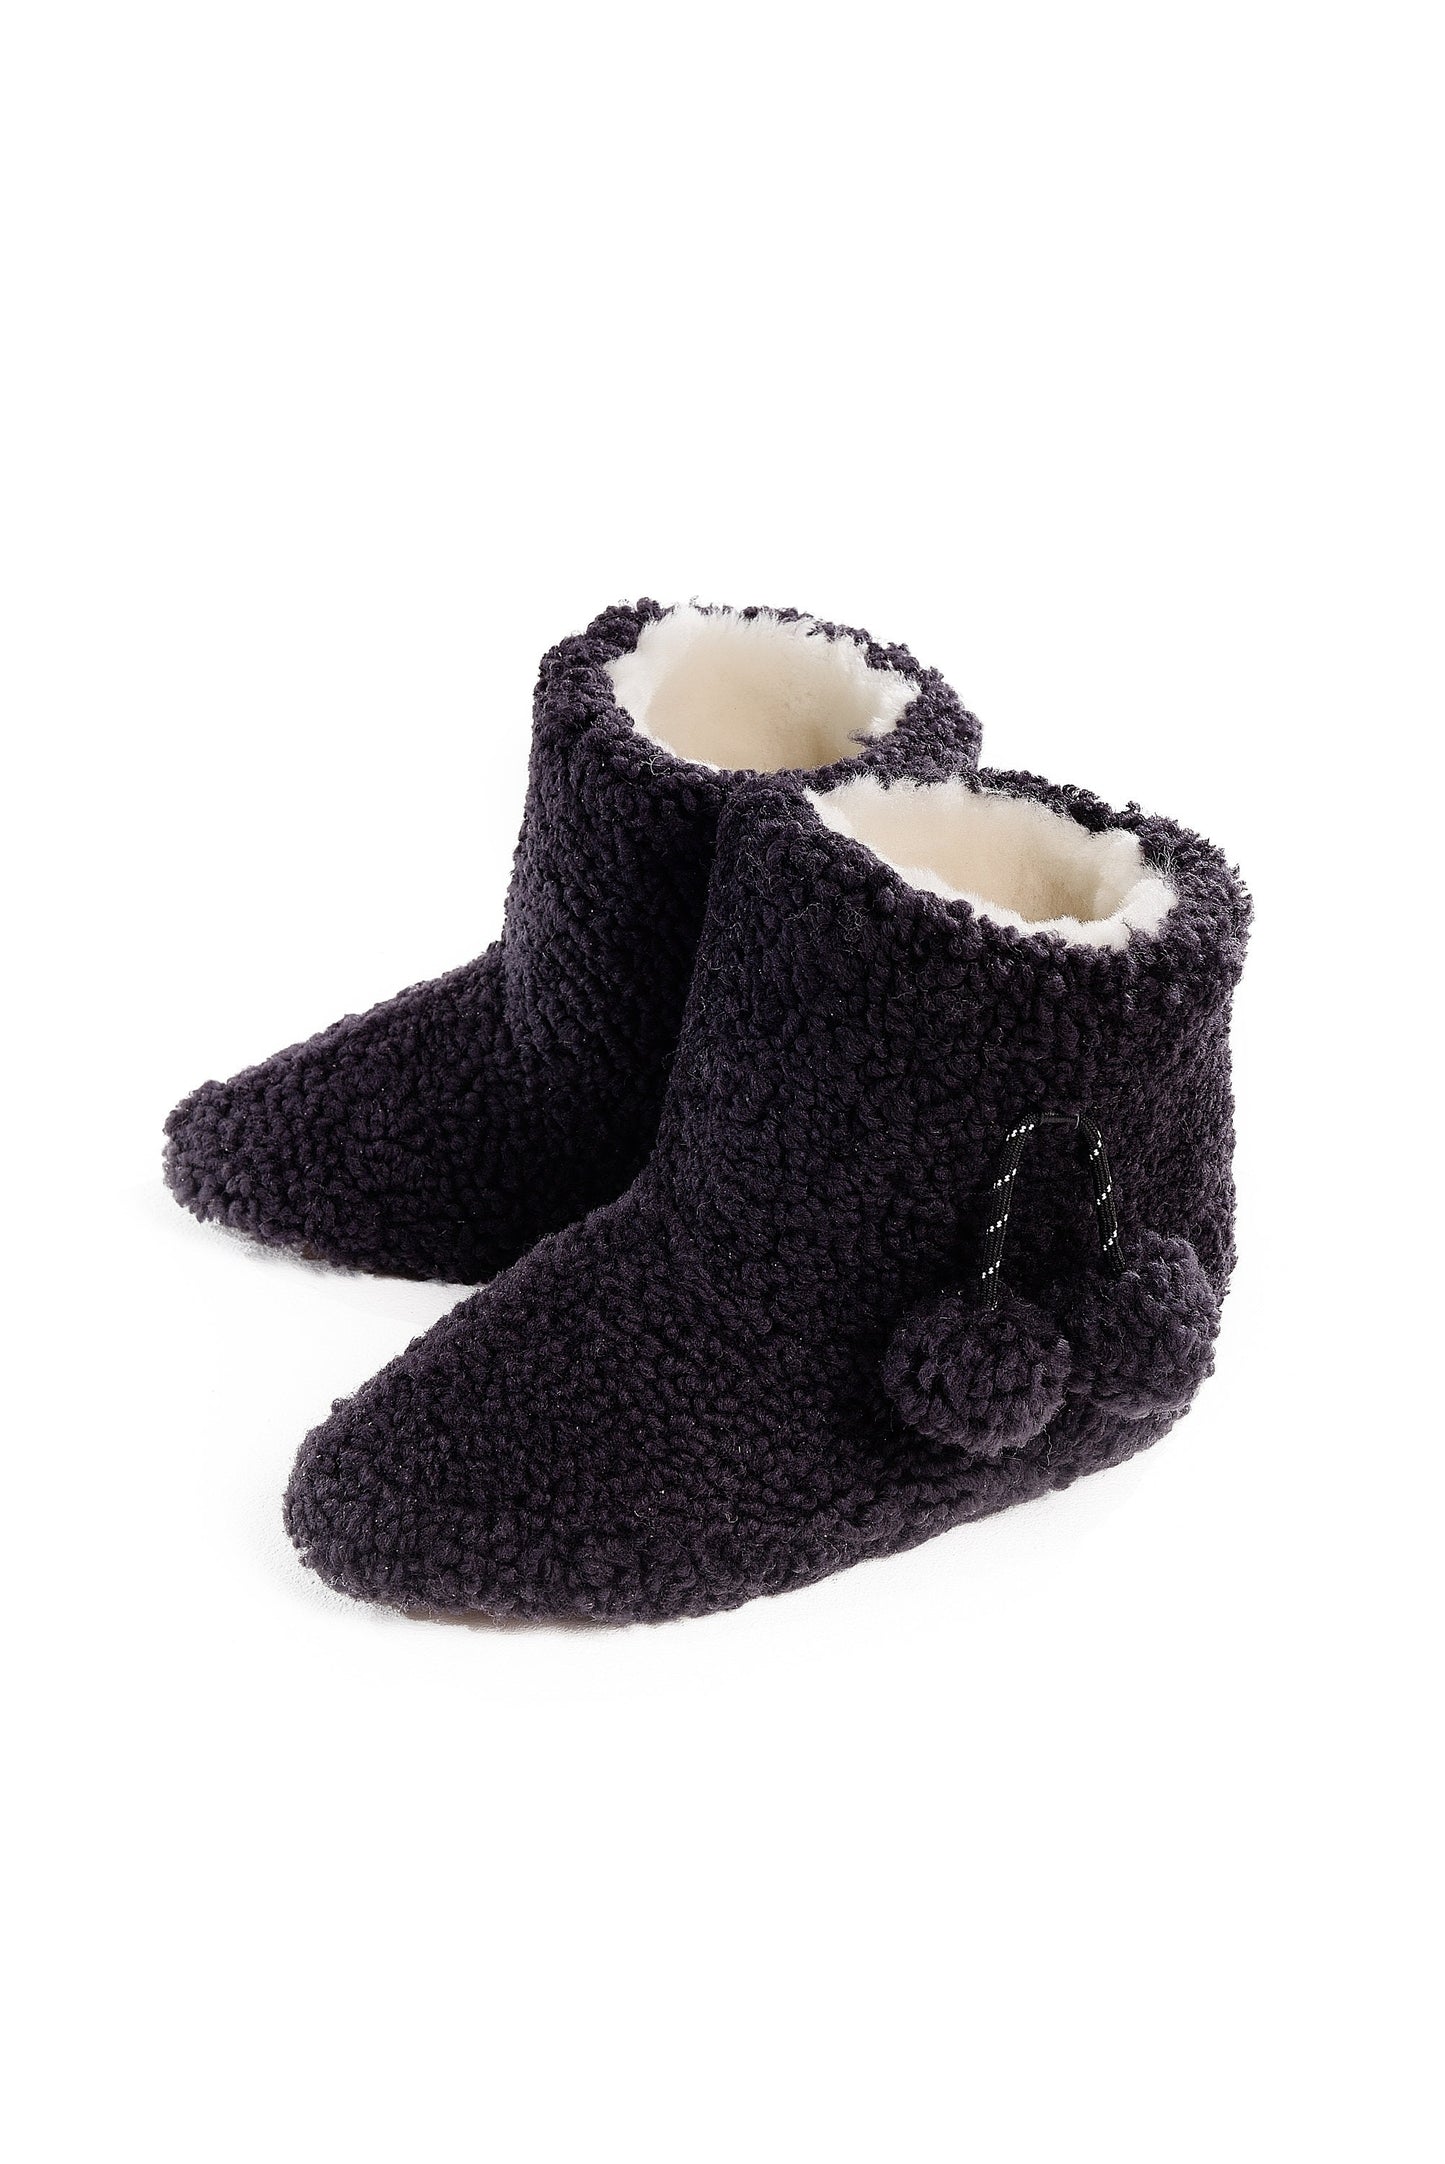 Real Womens Boucle Sheepskin Slipper Home Boots in Aubergine Color With Pom Pom